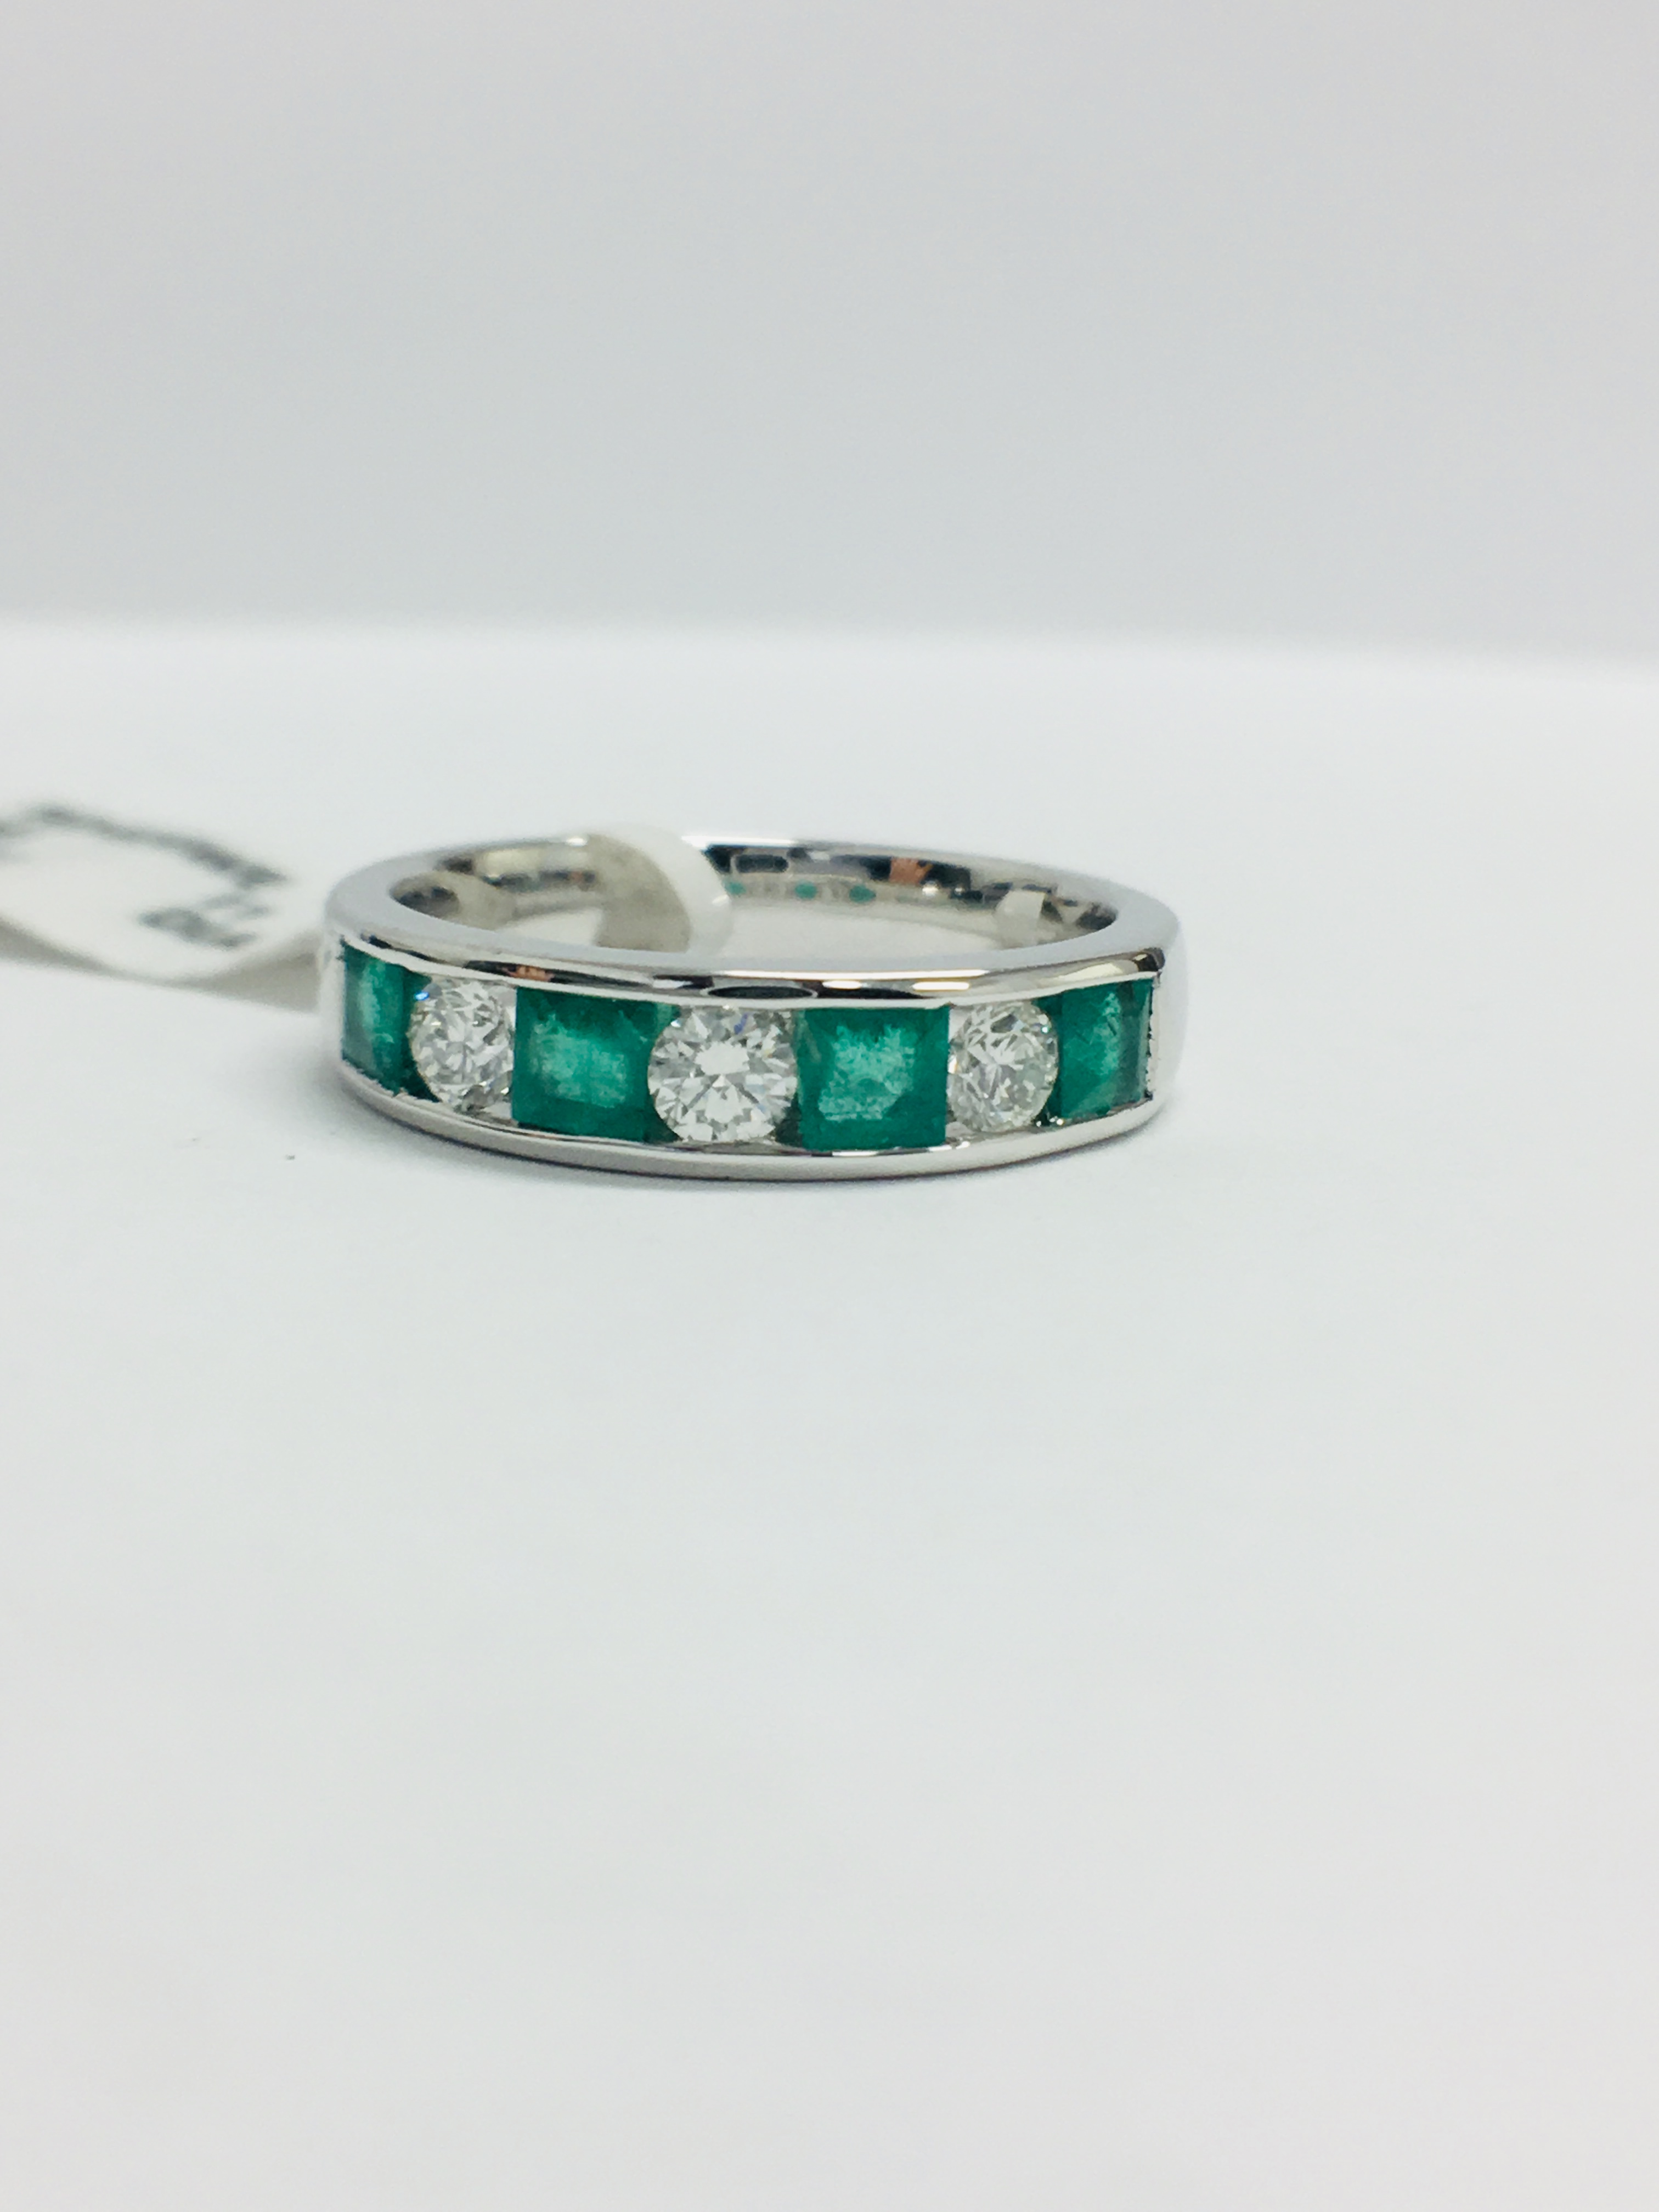 9Ct White Gold Emerald Diamond Channel Set Ring, - Image 12 of 13